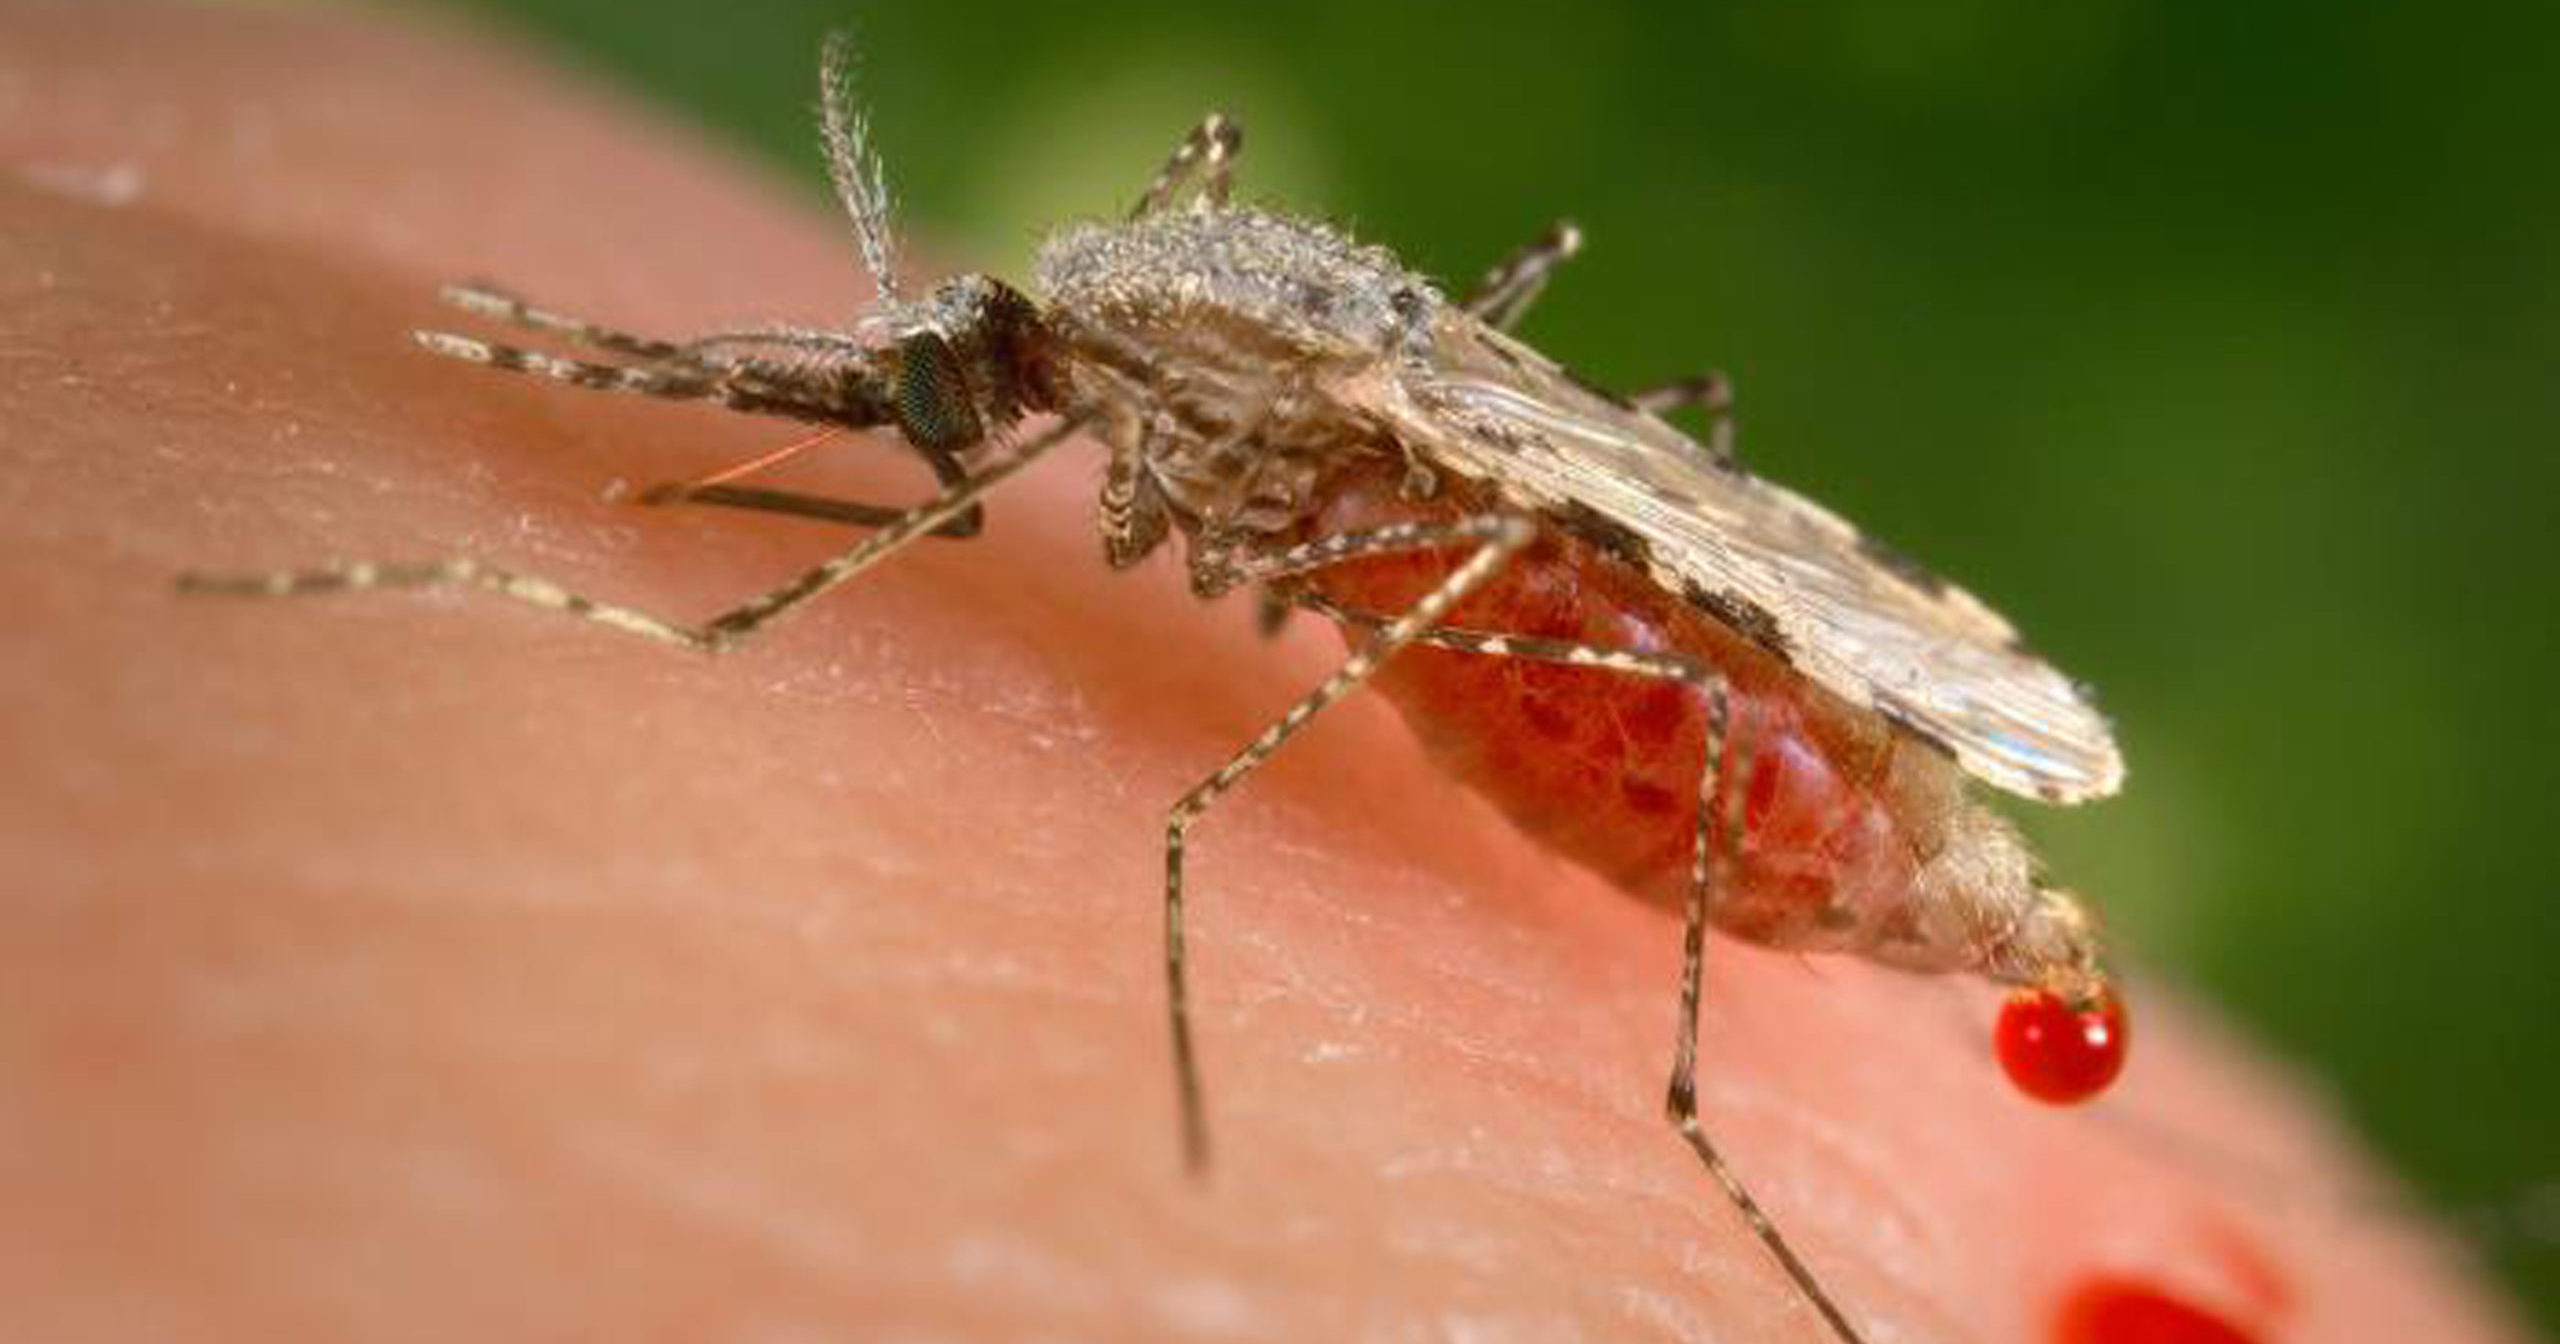 This photo provided by the Centers for Disease Control and Prevention shows a feeling female Anopheles stephensi mosquito on a human skin surface in the process of obtaining its blood meal through its sharp, needle-like labrum which is inserted into its human host.